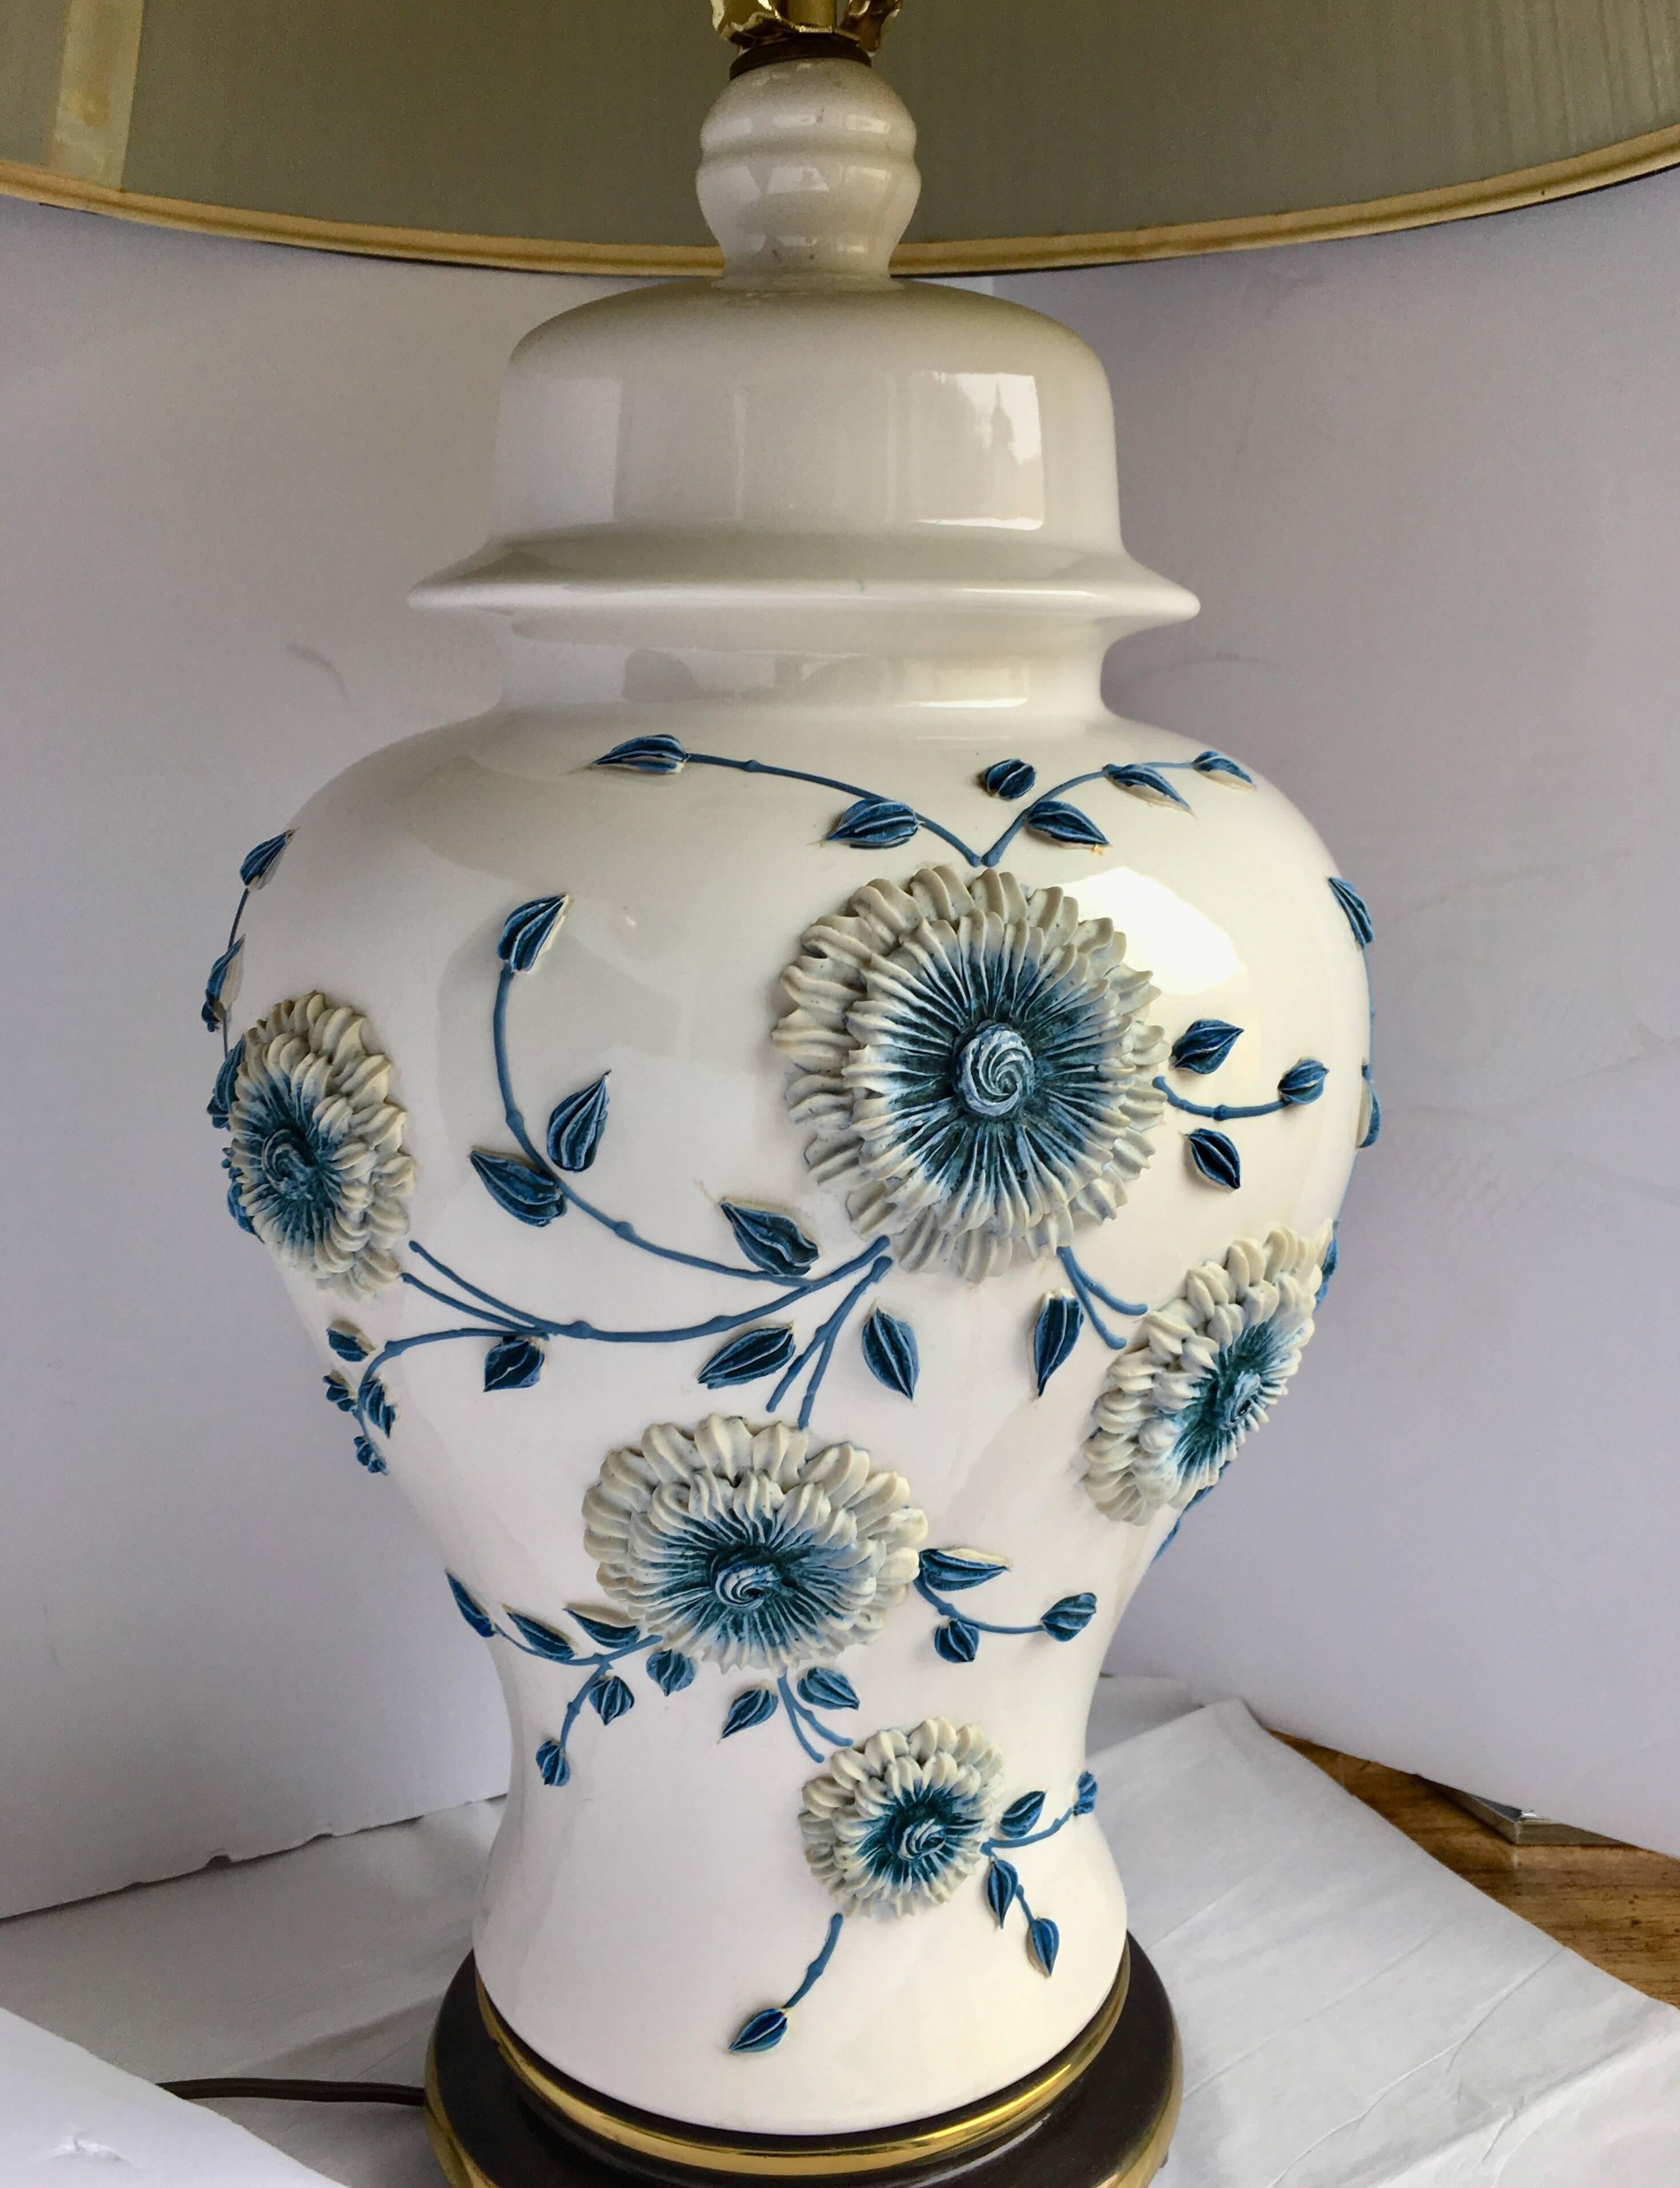 Midcentury blue and white/cream glazed porcelain table lamp featuring a hand applied floral relief design mounted on a brass bass. Lampshade not included.